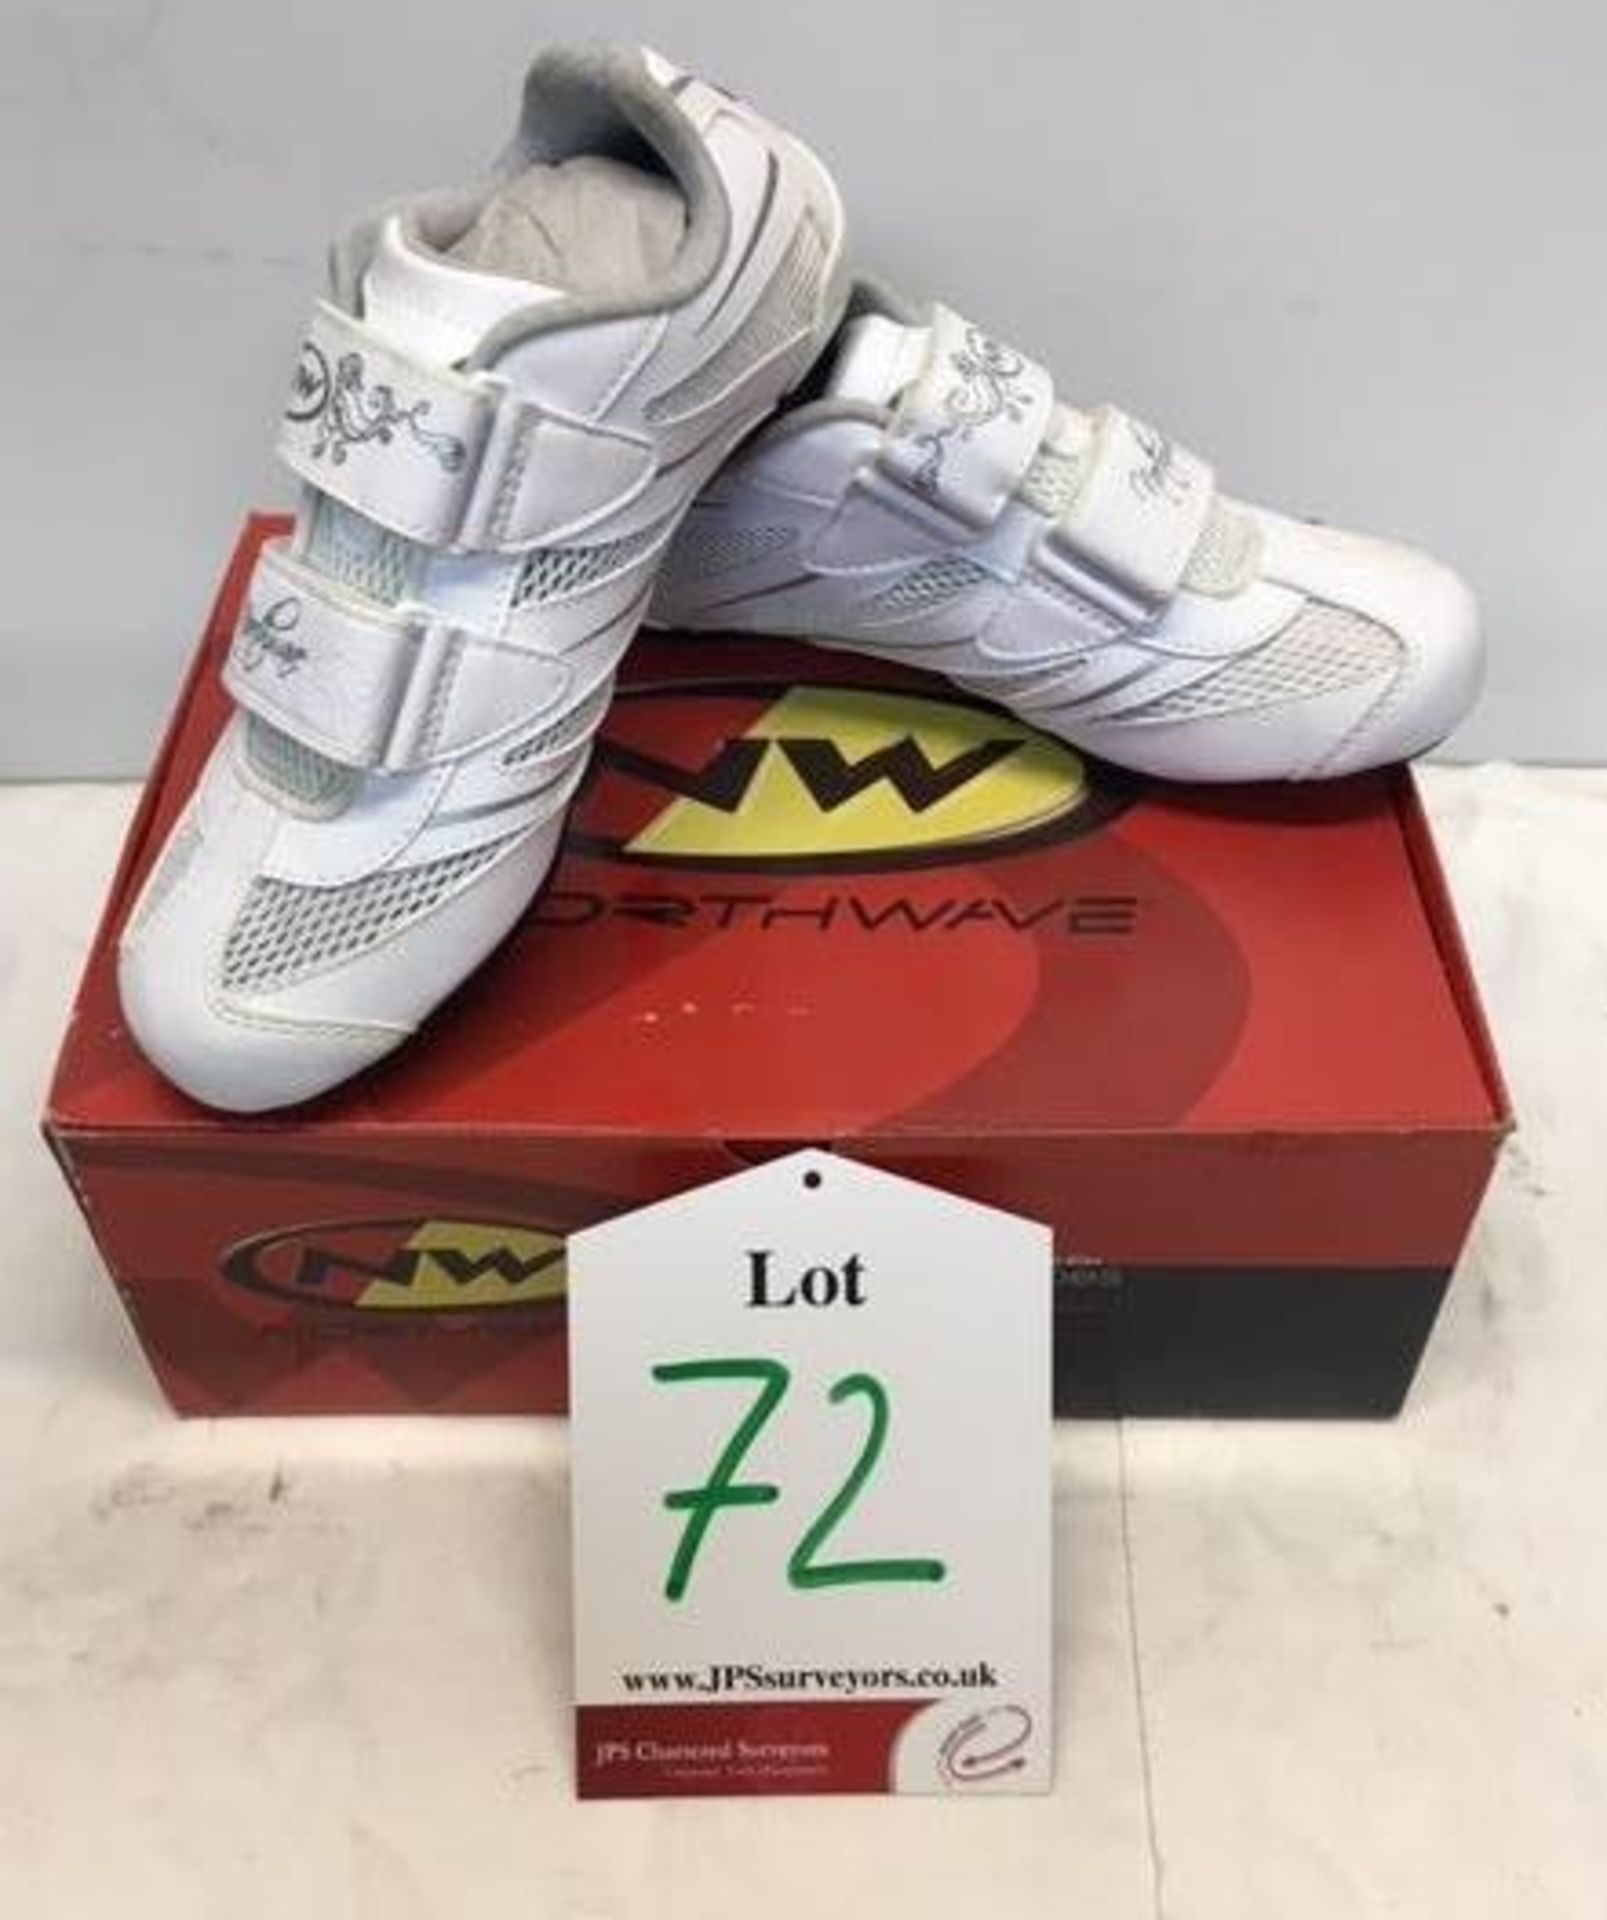 NORTHWAVE Eclipse Pro Ladies Road Shoes in White/Silver | UK 5.5 | RRP £50.00